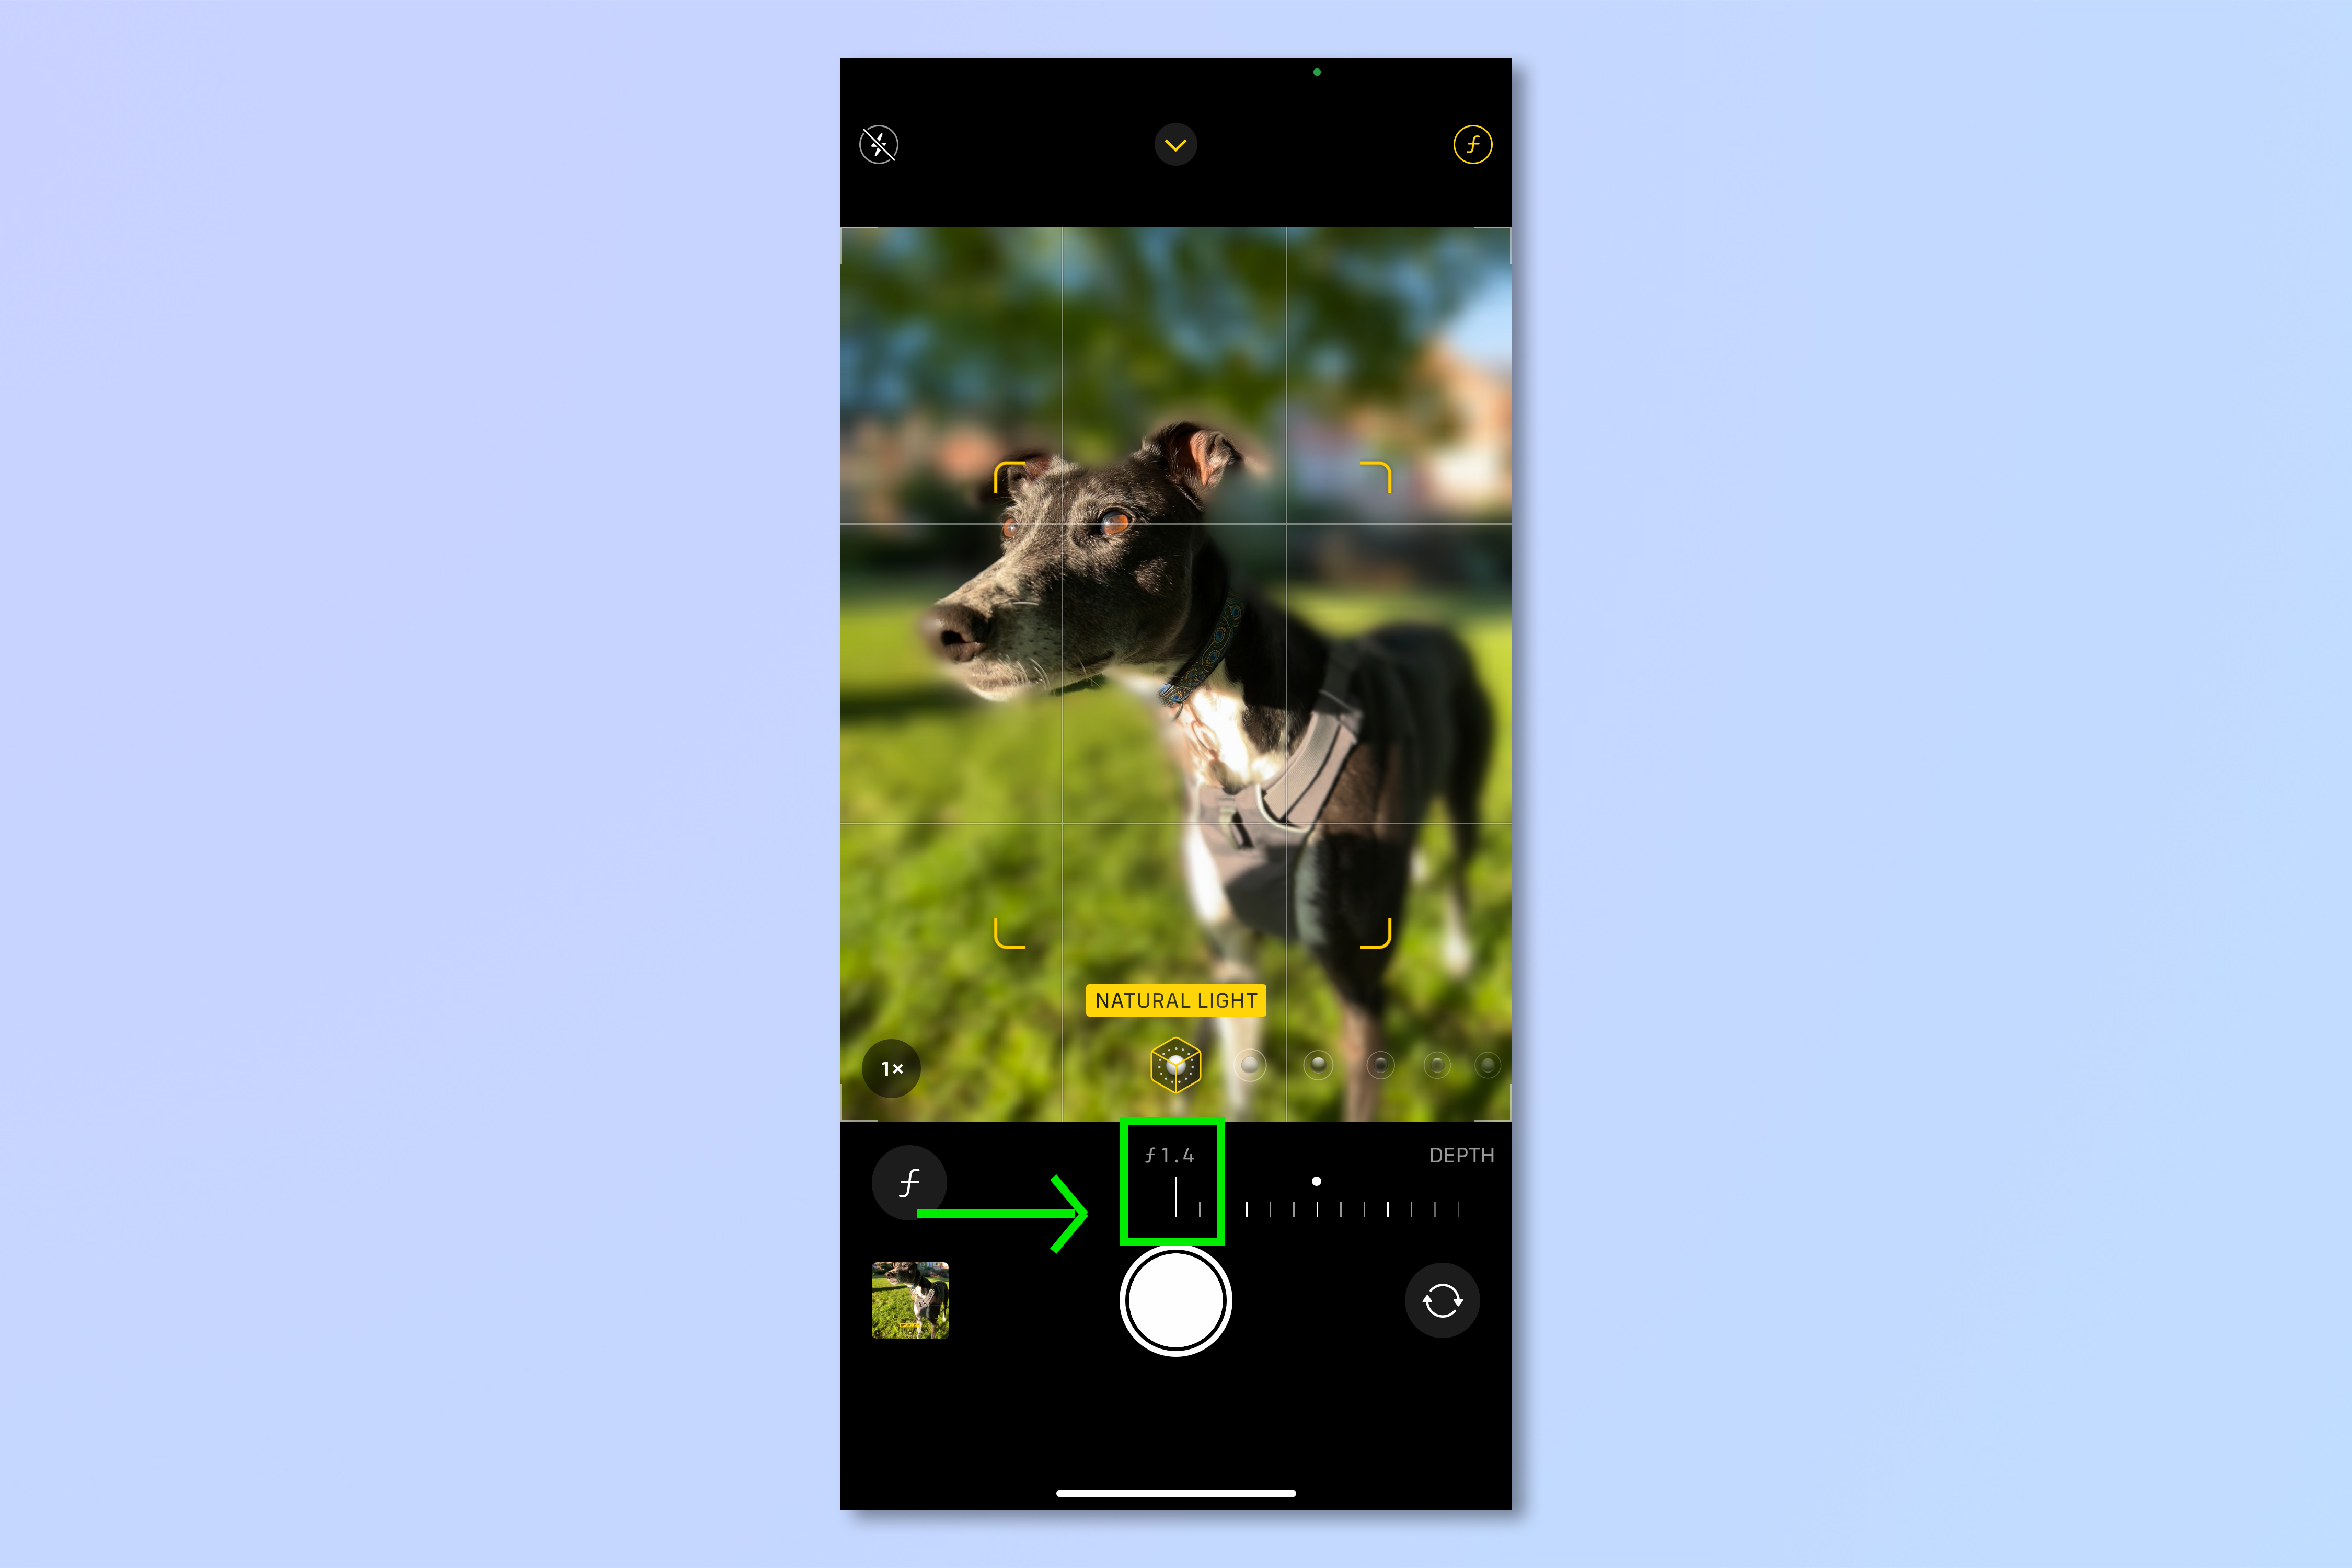 An iPhone screenshot of a grayhound pictured in the iPhone camera, demonstrating the steps required to blur the background of iPhone photos